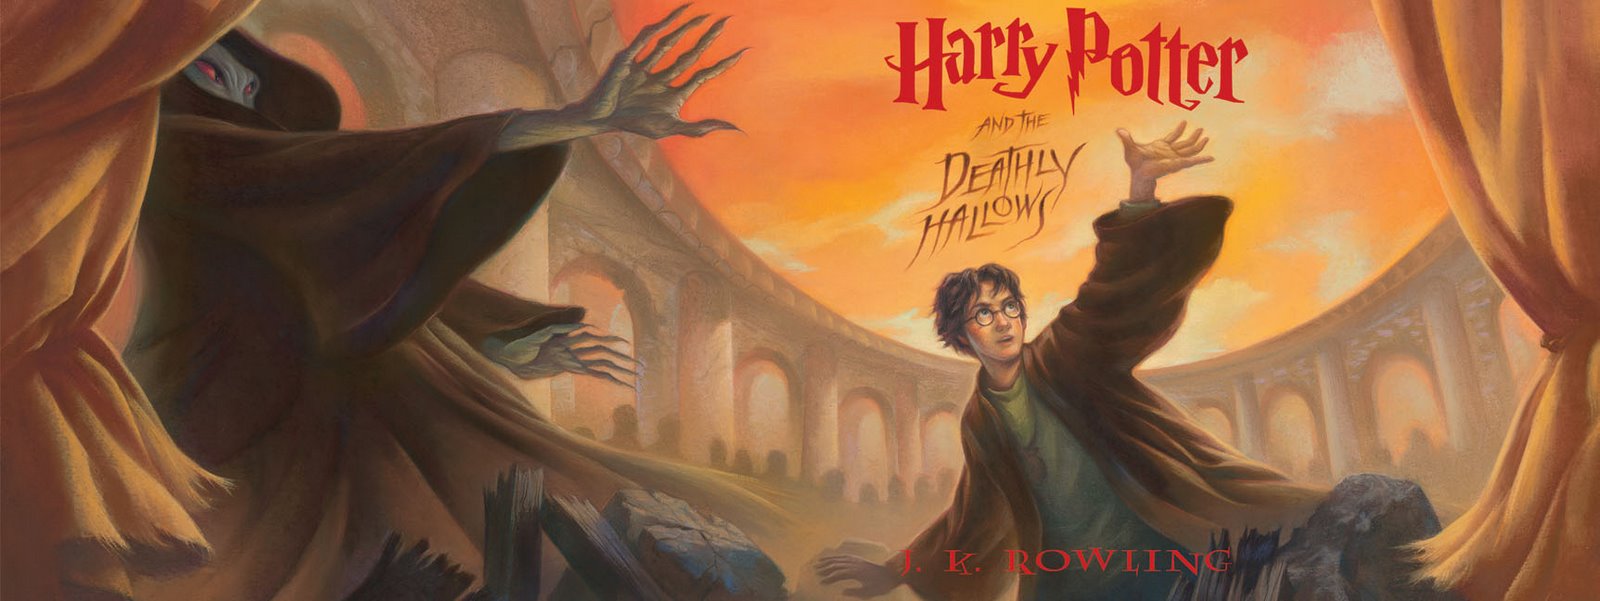 [Harry+Potter+and+the+Deathly+Hallows+spread.jpg]